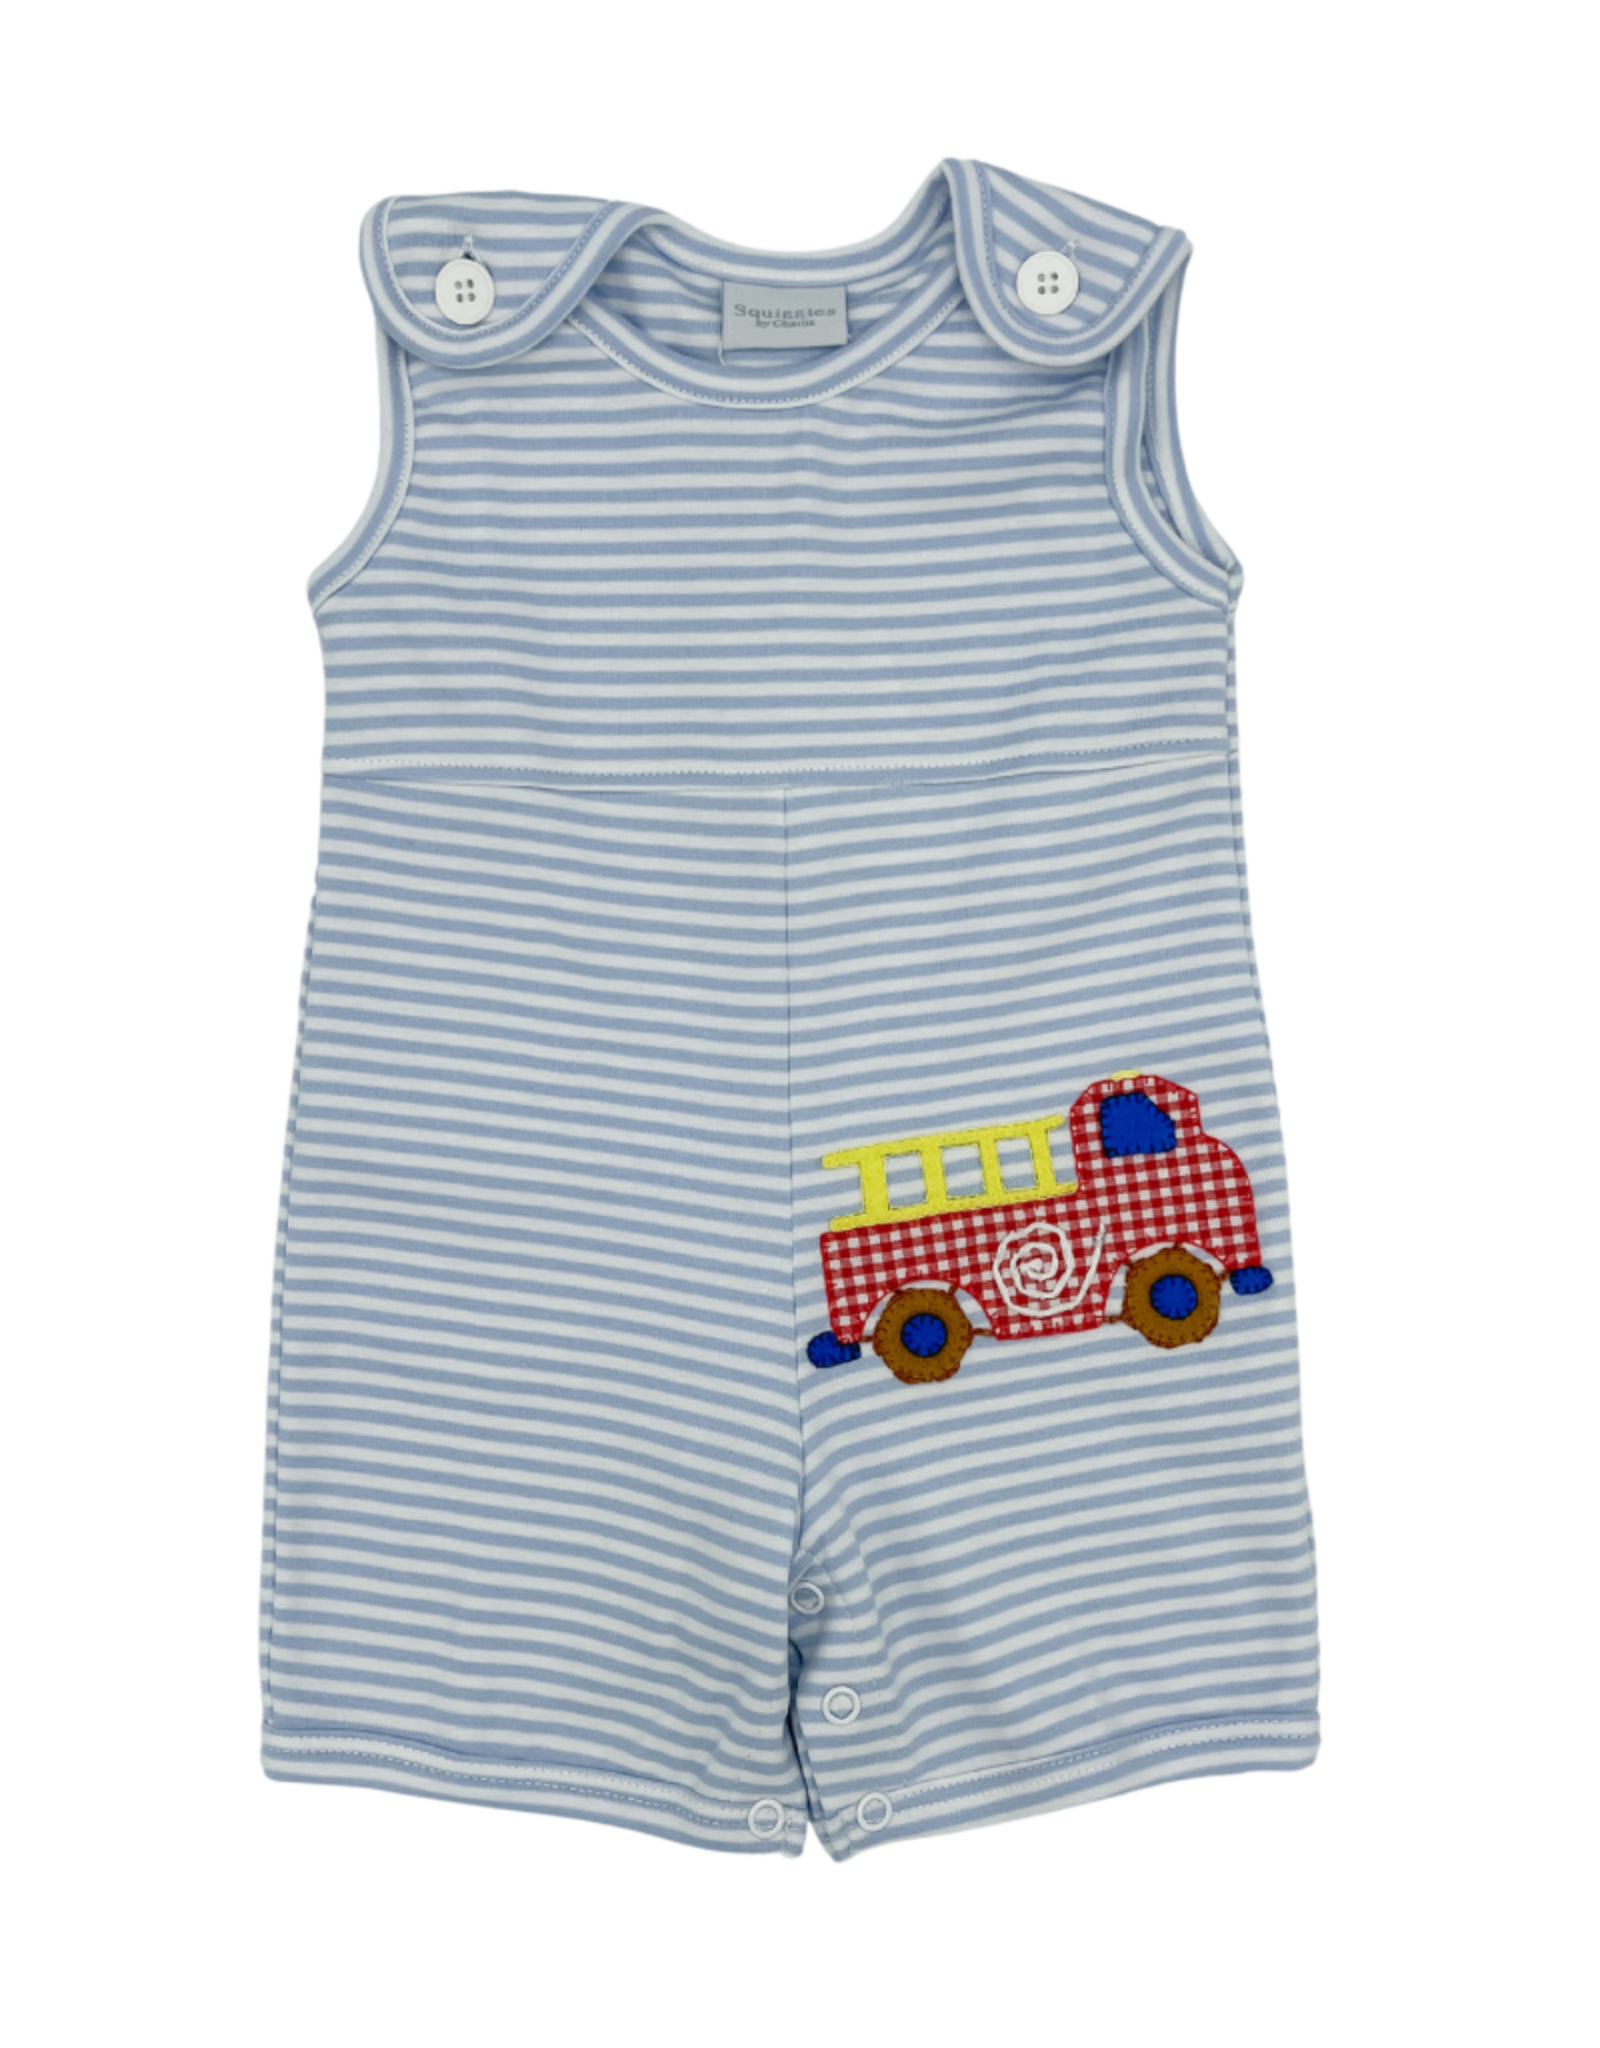 Squiggles Red Firetruck Sunsuit